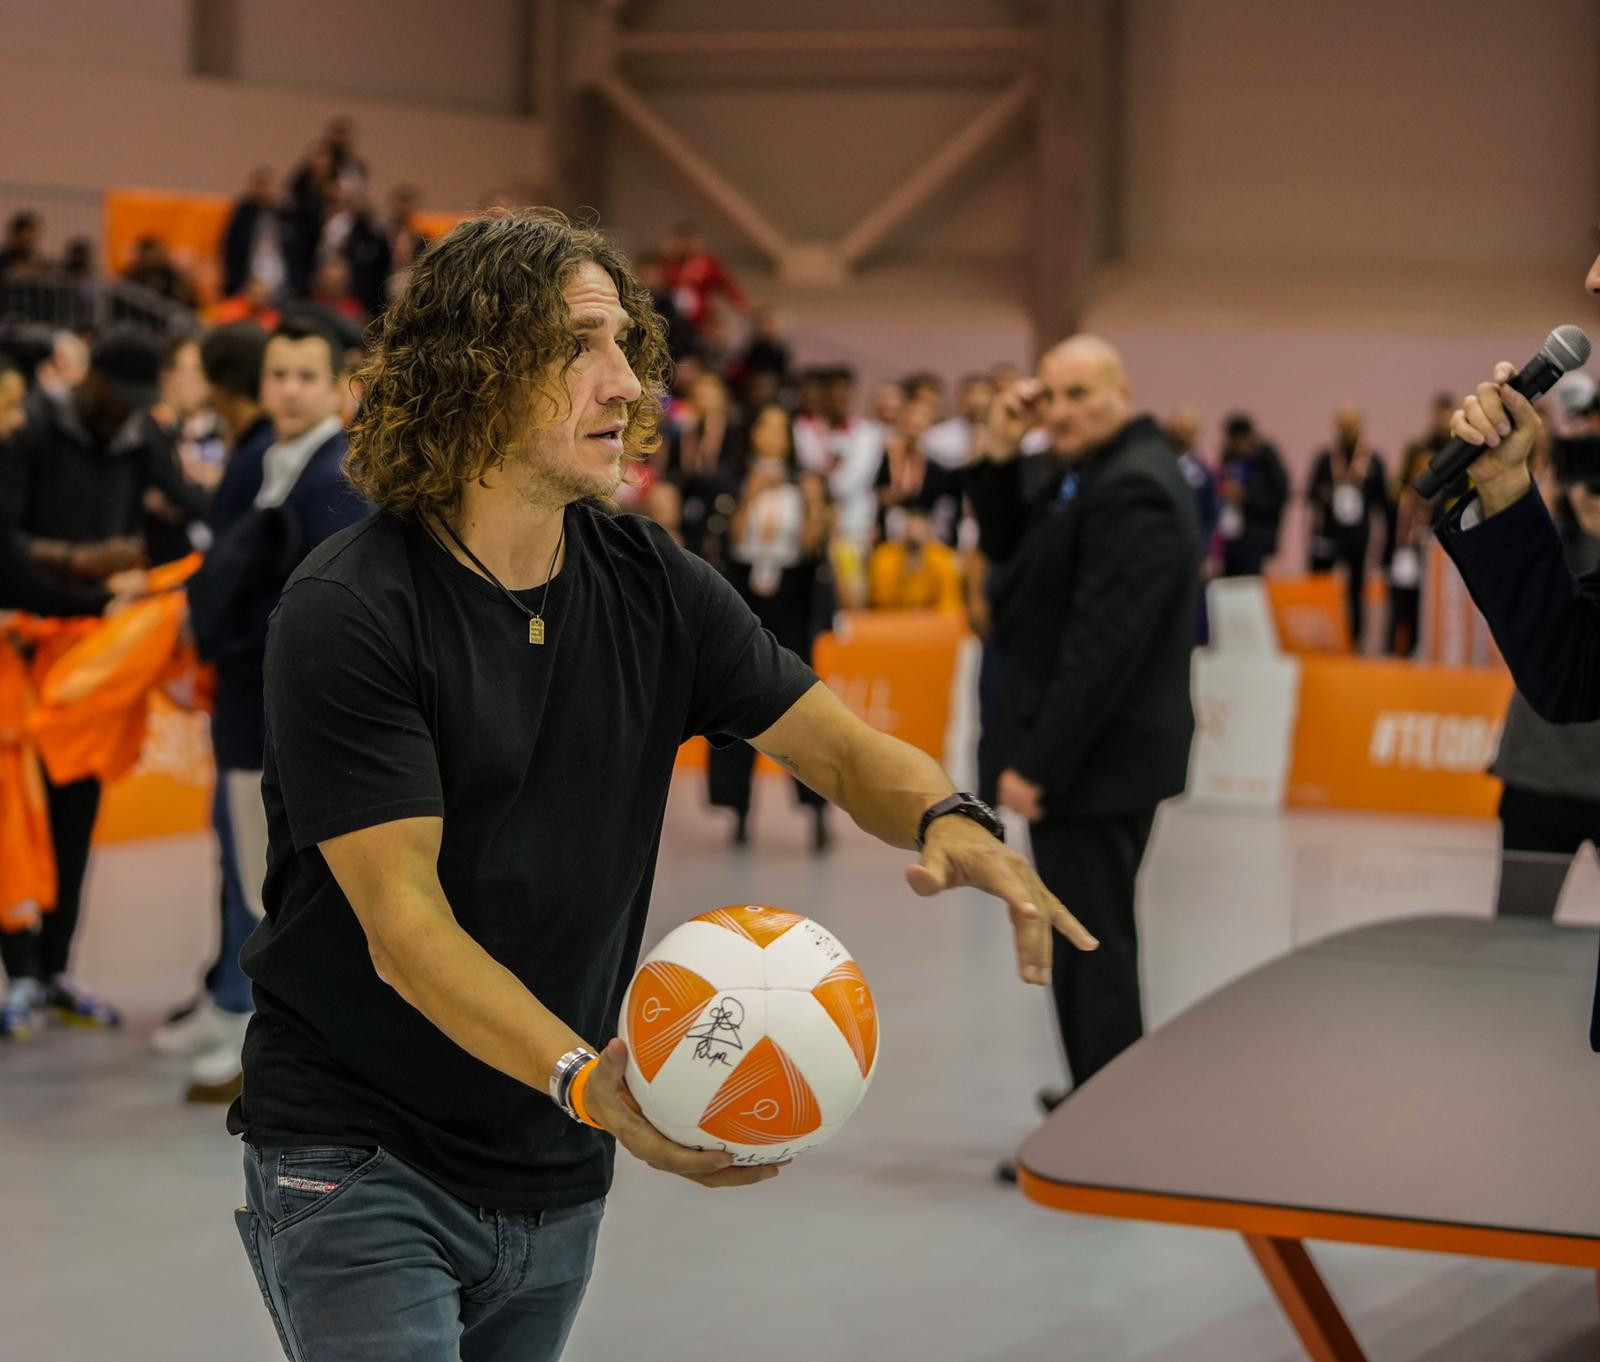 His former Barcelona teammate, Carlos Puyol of Spain, showed off his teqball skills ©FITEQ